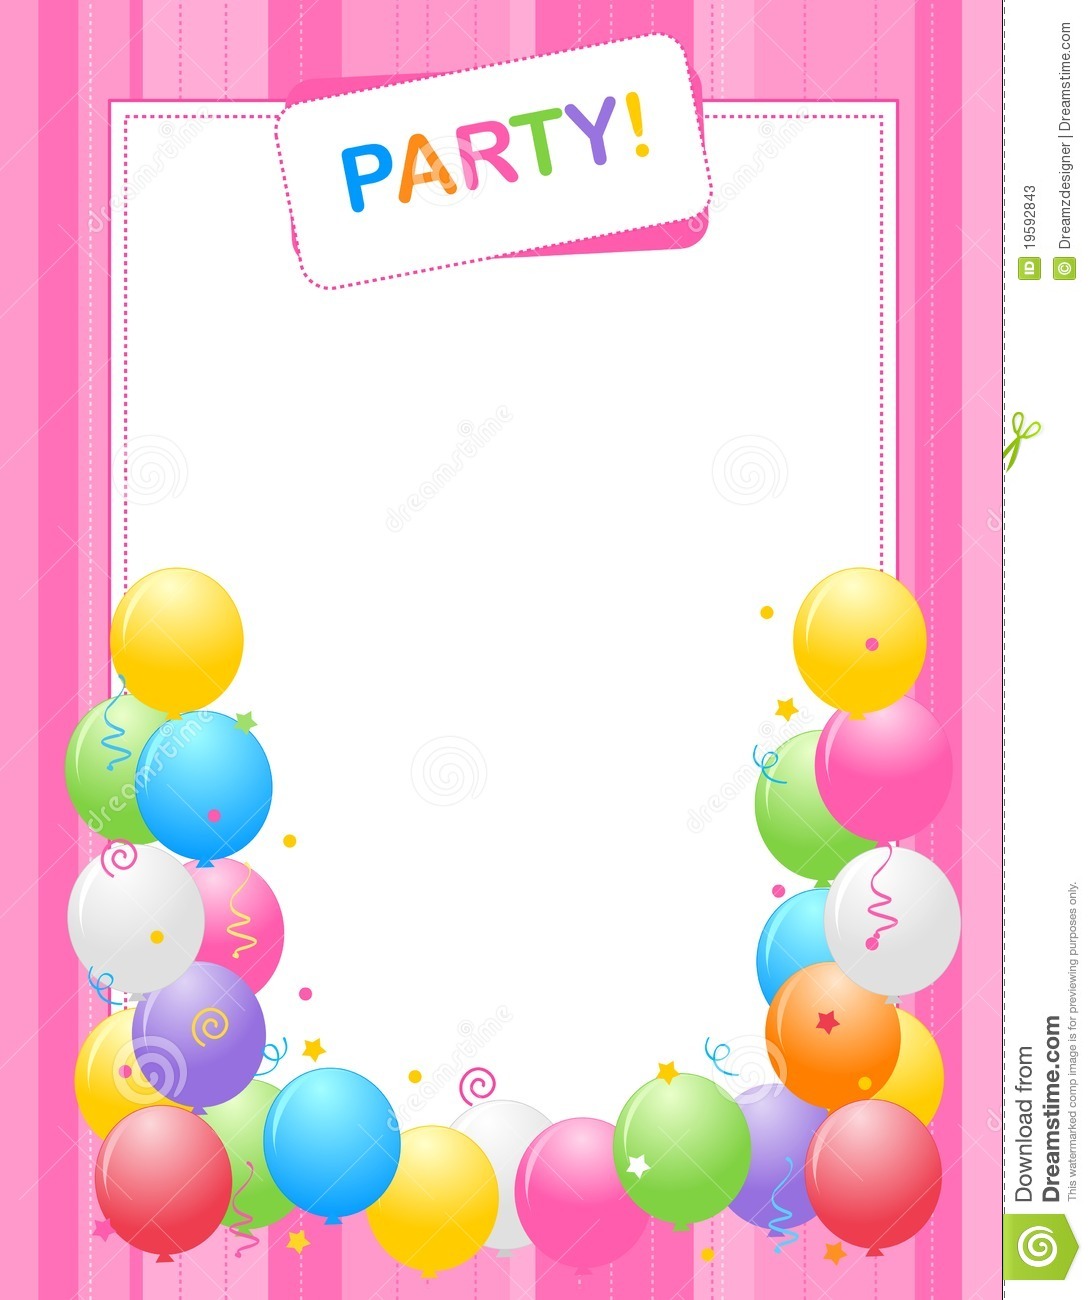 Dance Party Background   Clipart Panda   Free Clipart Images